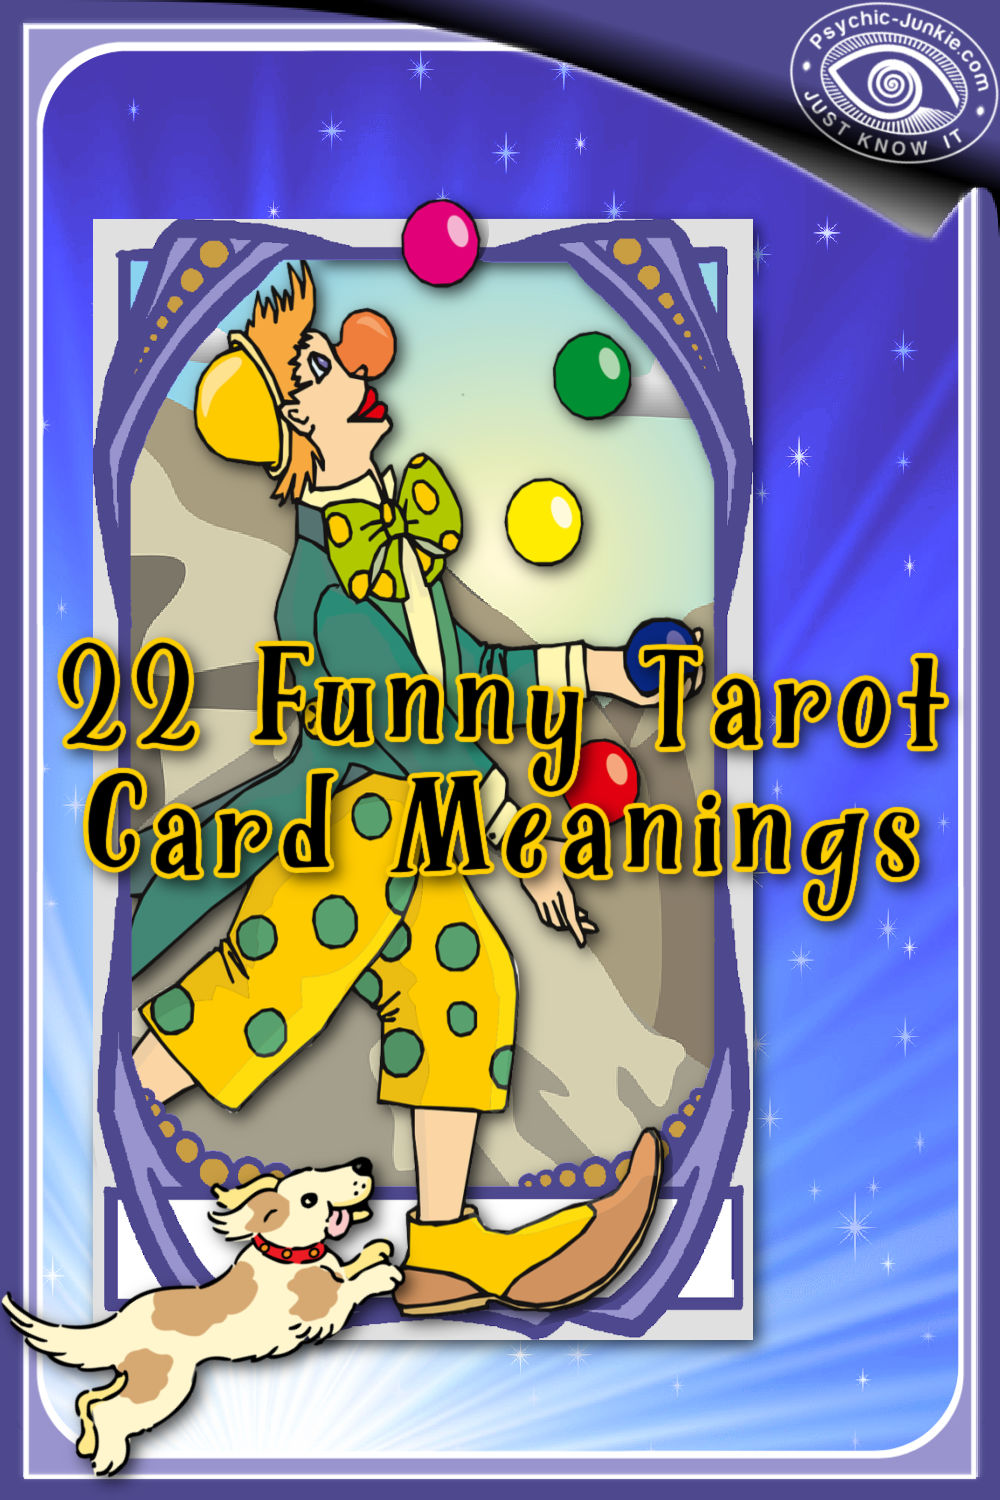 Finding Funny Tarot Card Meanings